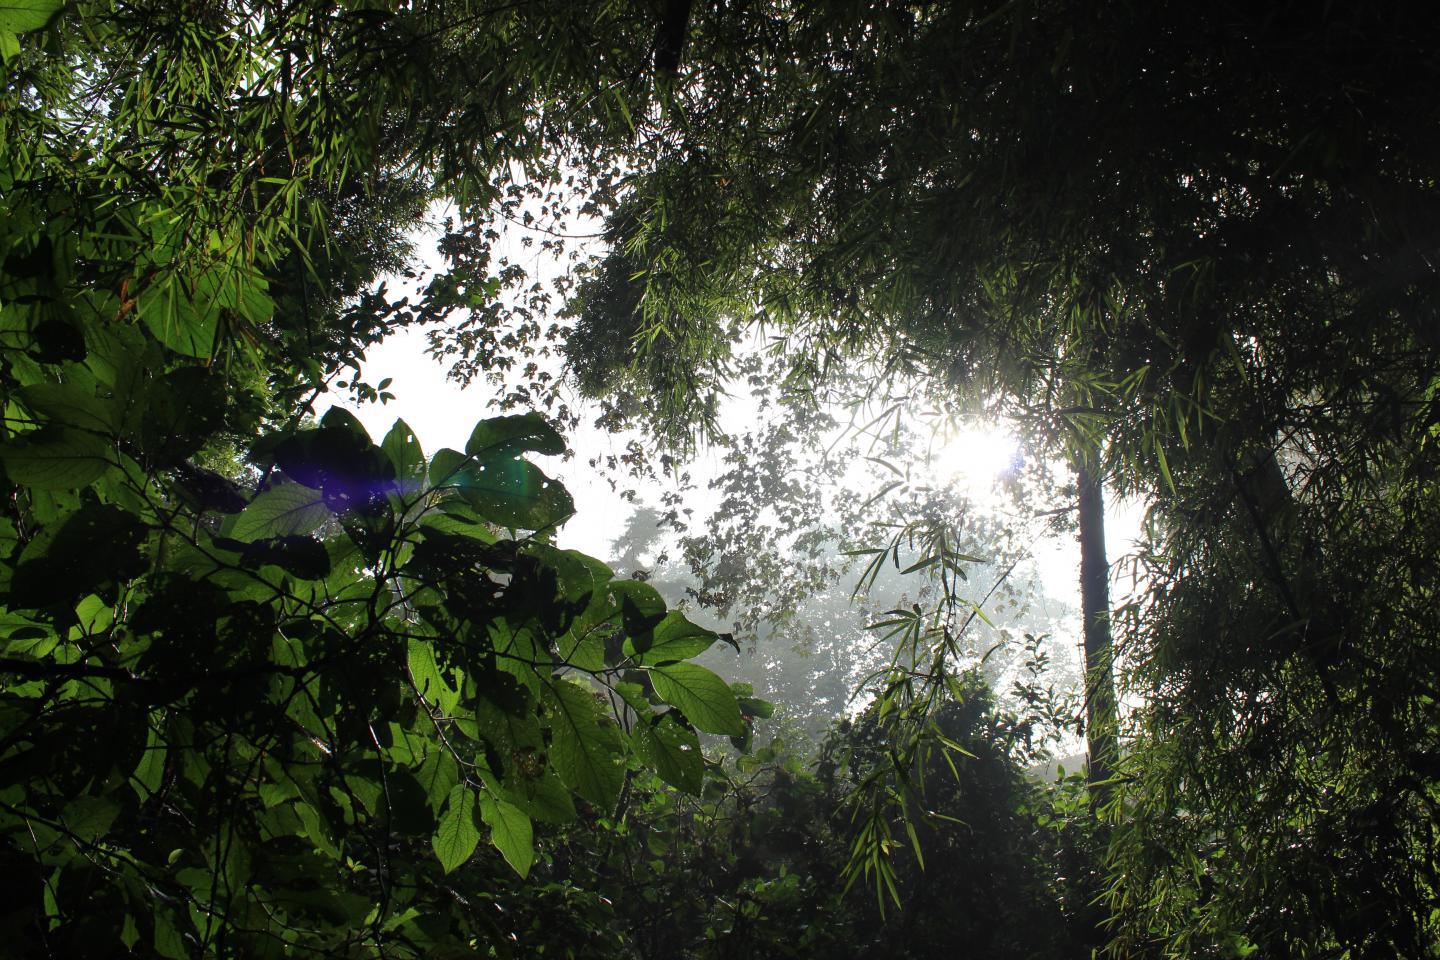 View from the Canopy Floor in the Cloud Forest Sanctuary, Xalapa, Mexico